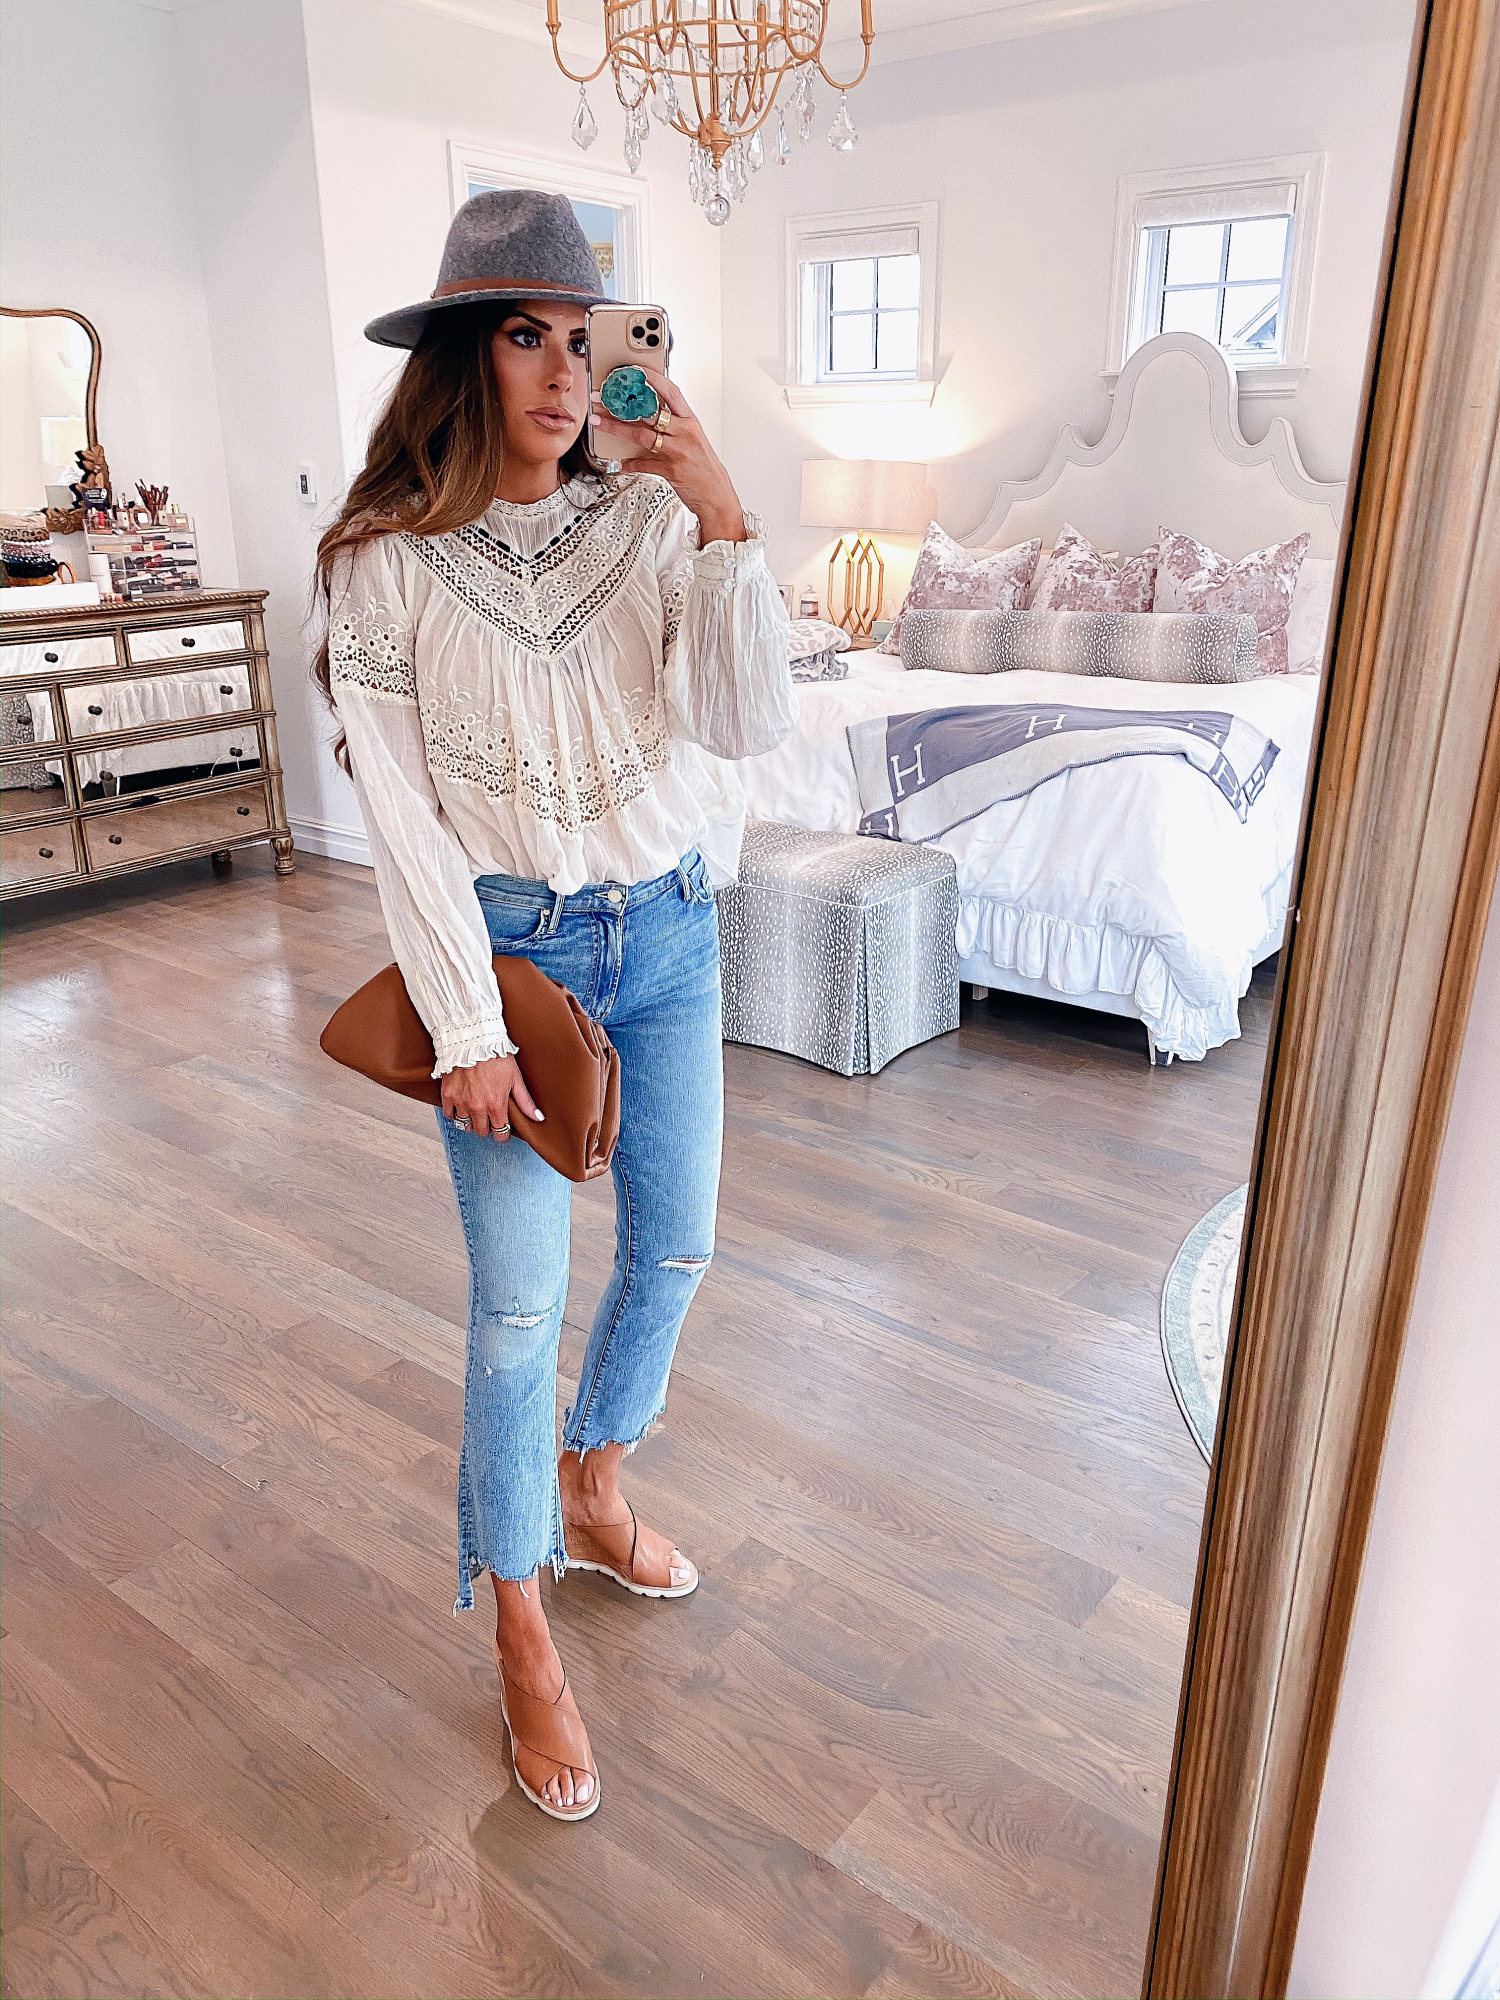 Instagram Recap by popular US lifestyle blog, The Sweetest Thing: image of Emily Gemma wearing a Free People top, Nordstrom Mother The Insider Ripped Chew Hem Crop Bootcut Jeans, PORT BUTTON STUD EARRINGS, Free People Wythe Leather Band Felt Hat, Nordstrom Pillow Talk Lip Cheat Lip Liner CHARLOTTE TILBURY, Nordstrom Hot Lips Lipstick CHARLOTTE TILBURY, Nordstrom Gloss Luxe Moisturizing Lipgloss TOM FORD, Steve Madden FLORETTA COGNAC LEATHER wedges, and holding a Net-A-Porter BOTTEGA VENETA The Pouch small gathered leather clutch.